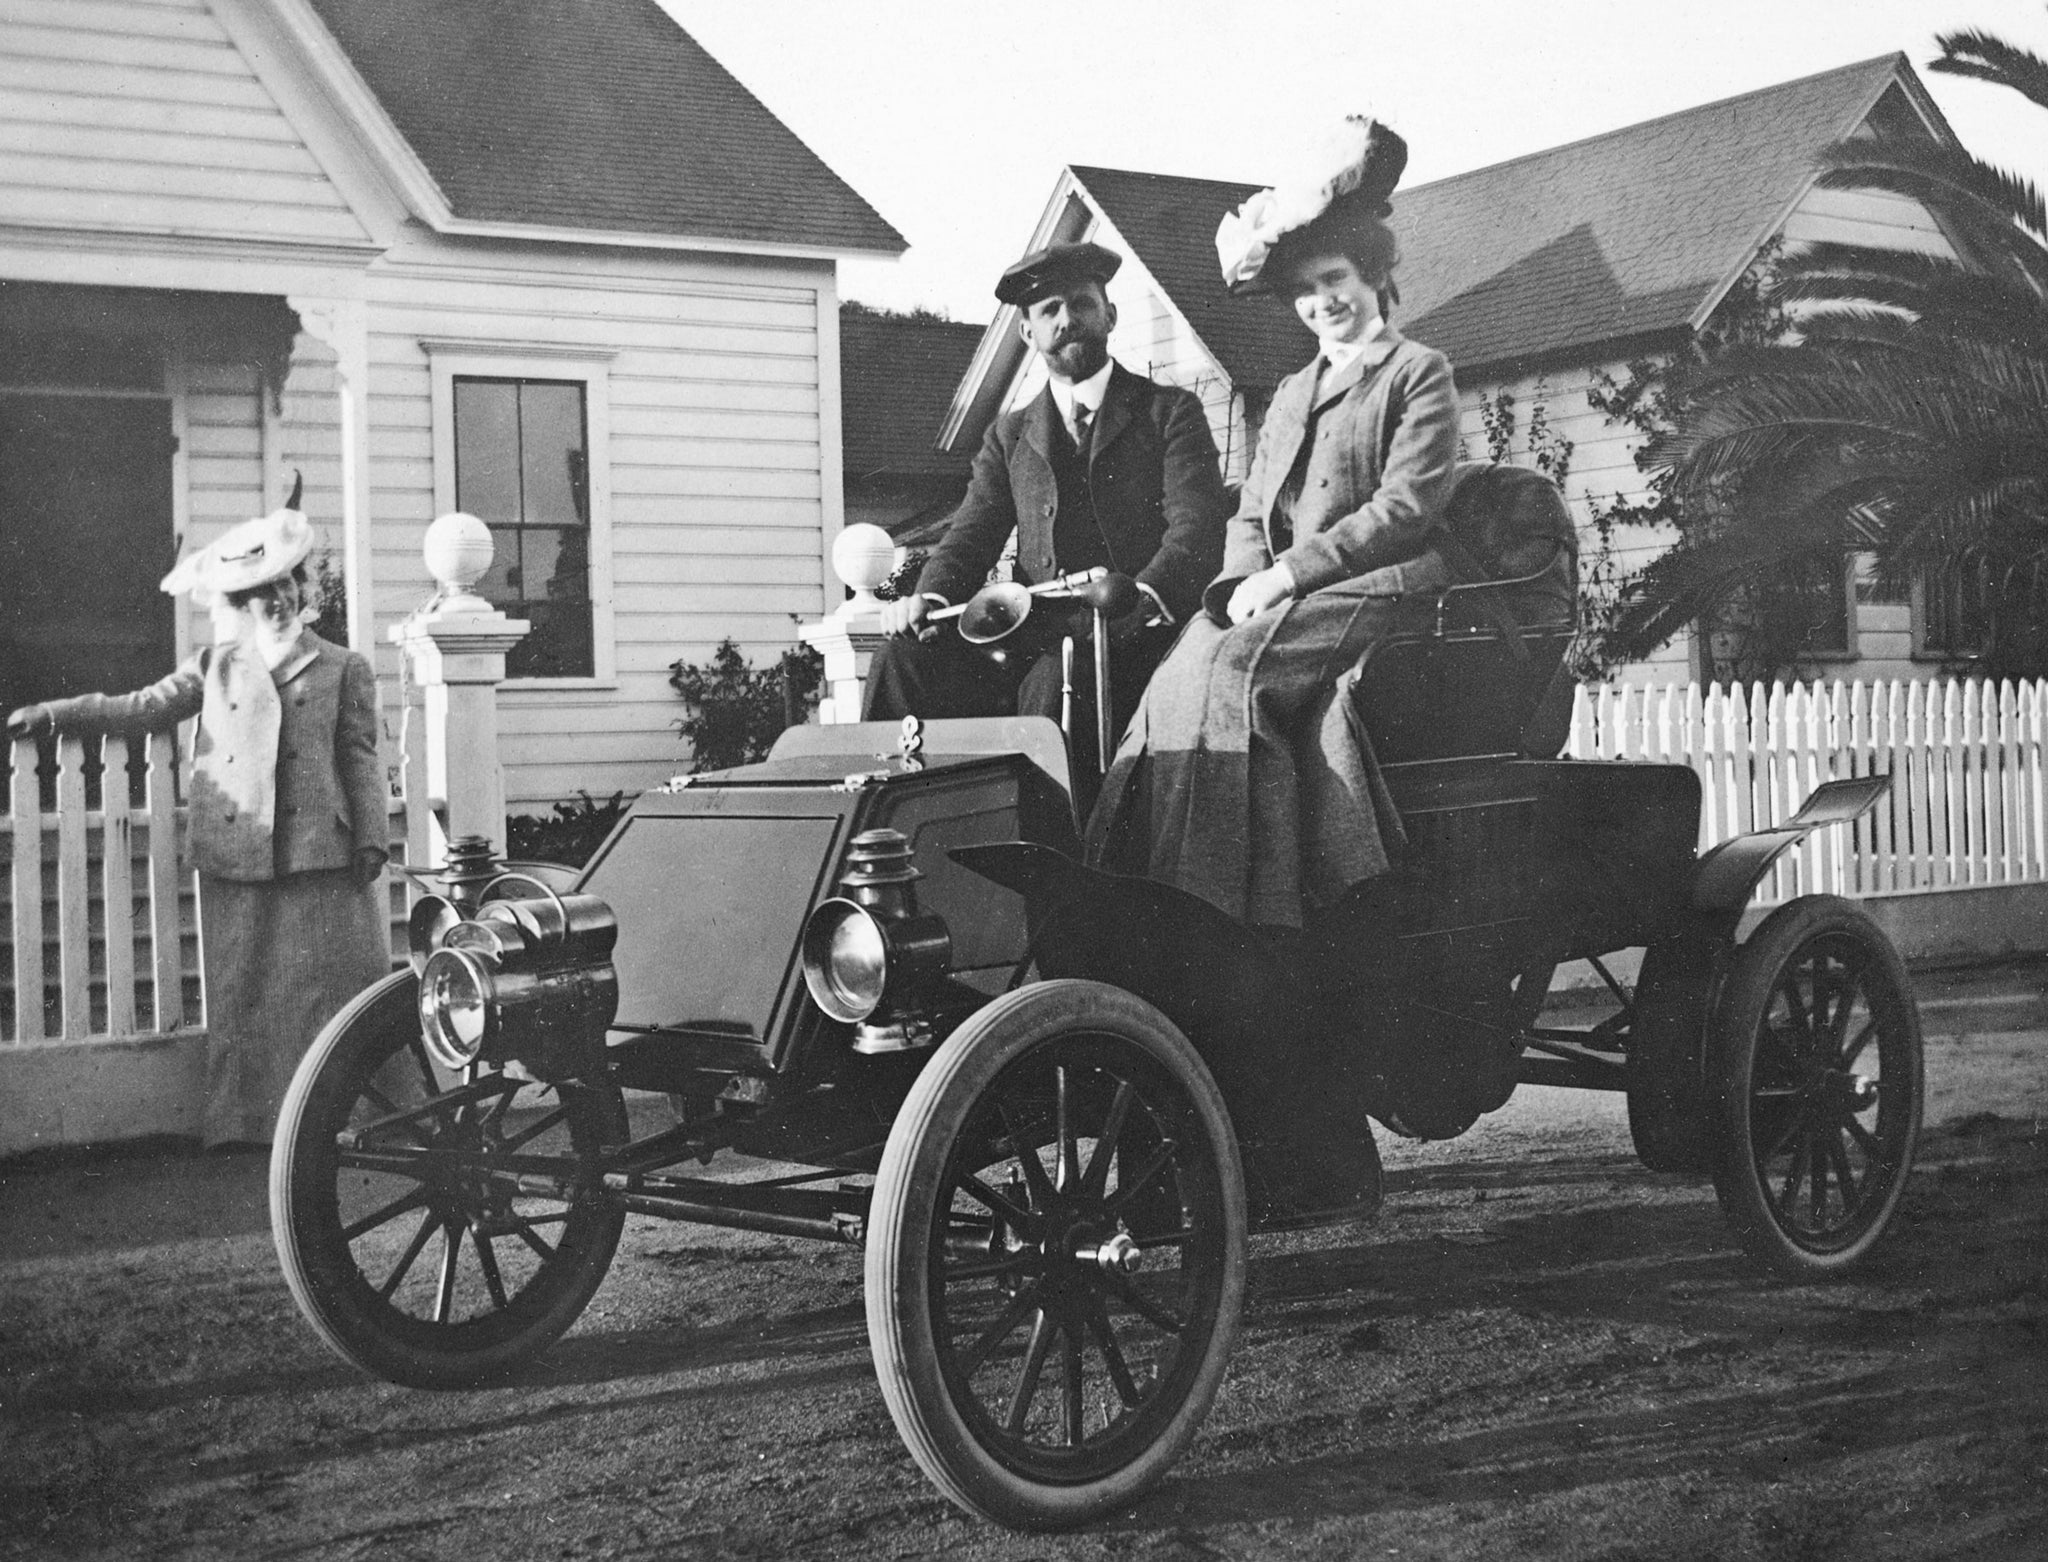 The first automobile in Watsonville, 1902. This 1902 Rambler Model C Runabout was a single-cylinder, six-horsepower vehicle and was truly a horseless carriage using a lever to steer the vehicle. It sold for $750. -- Courtesy of Charles Bergtold